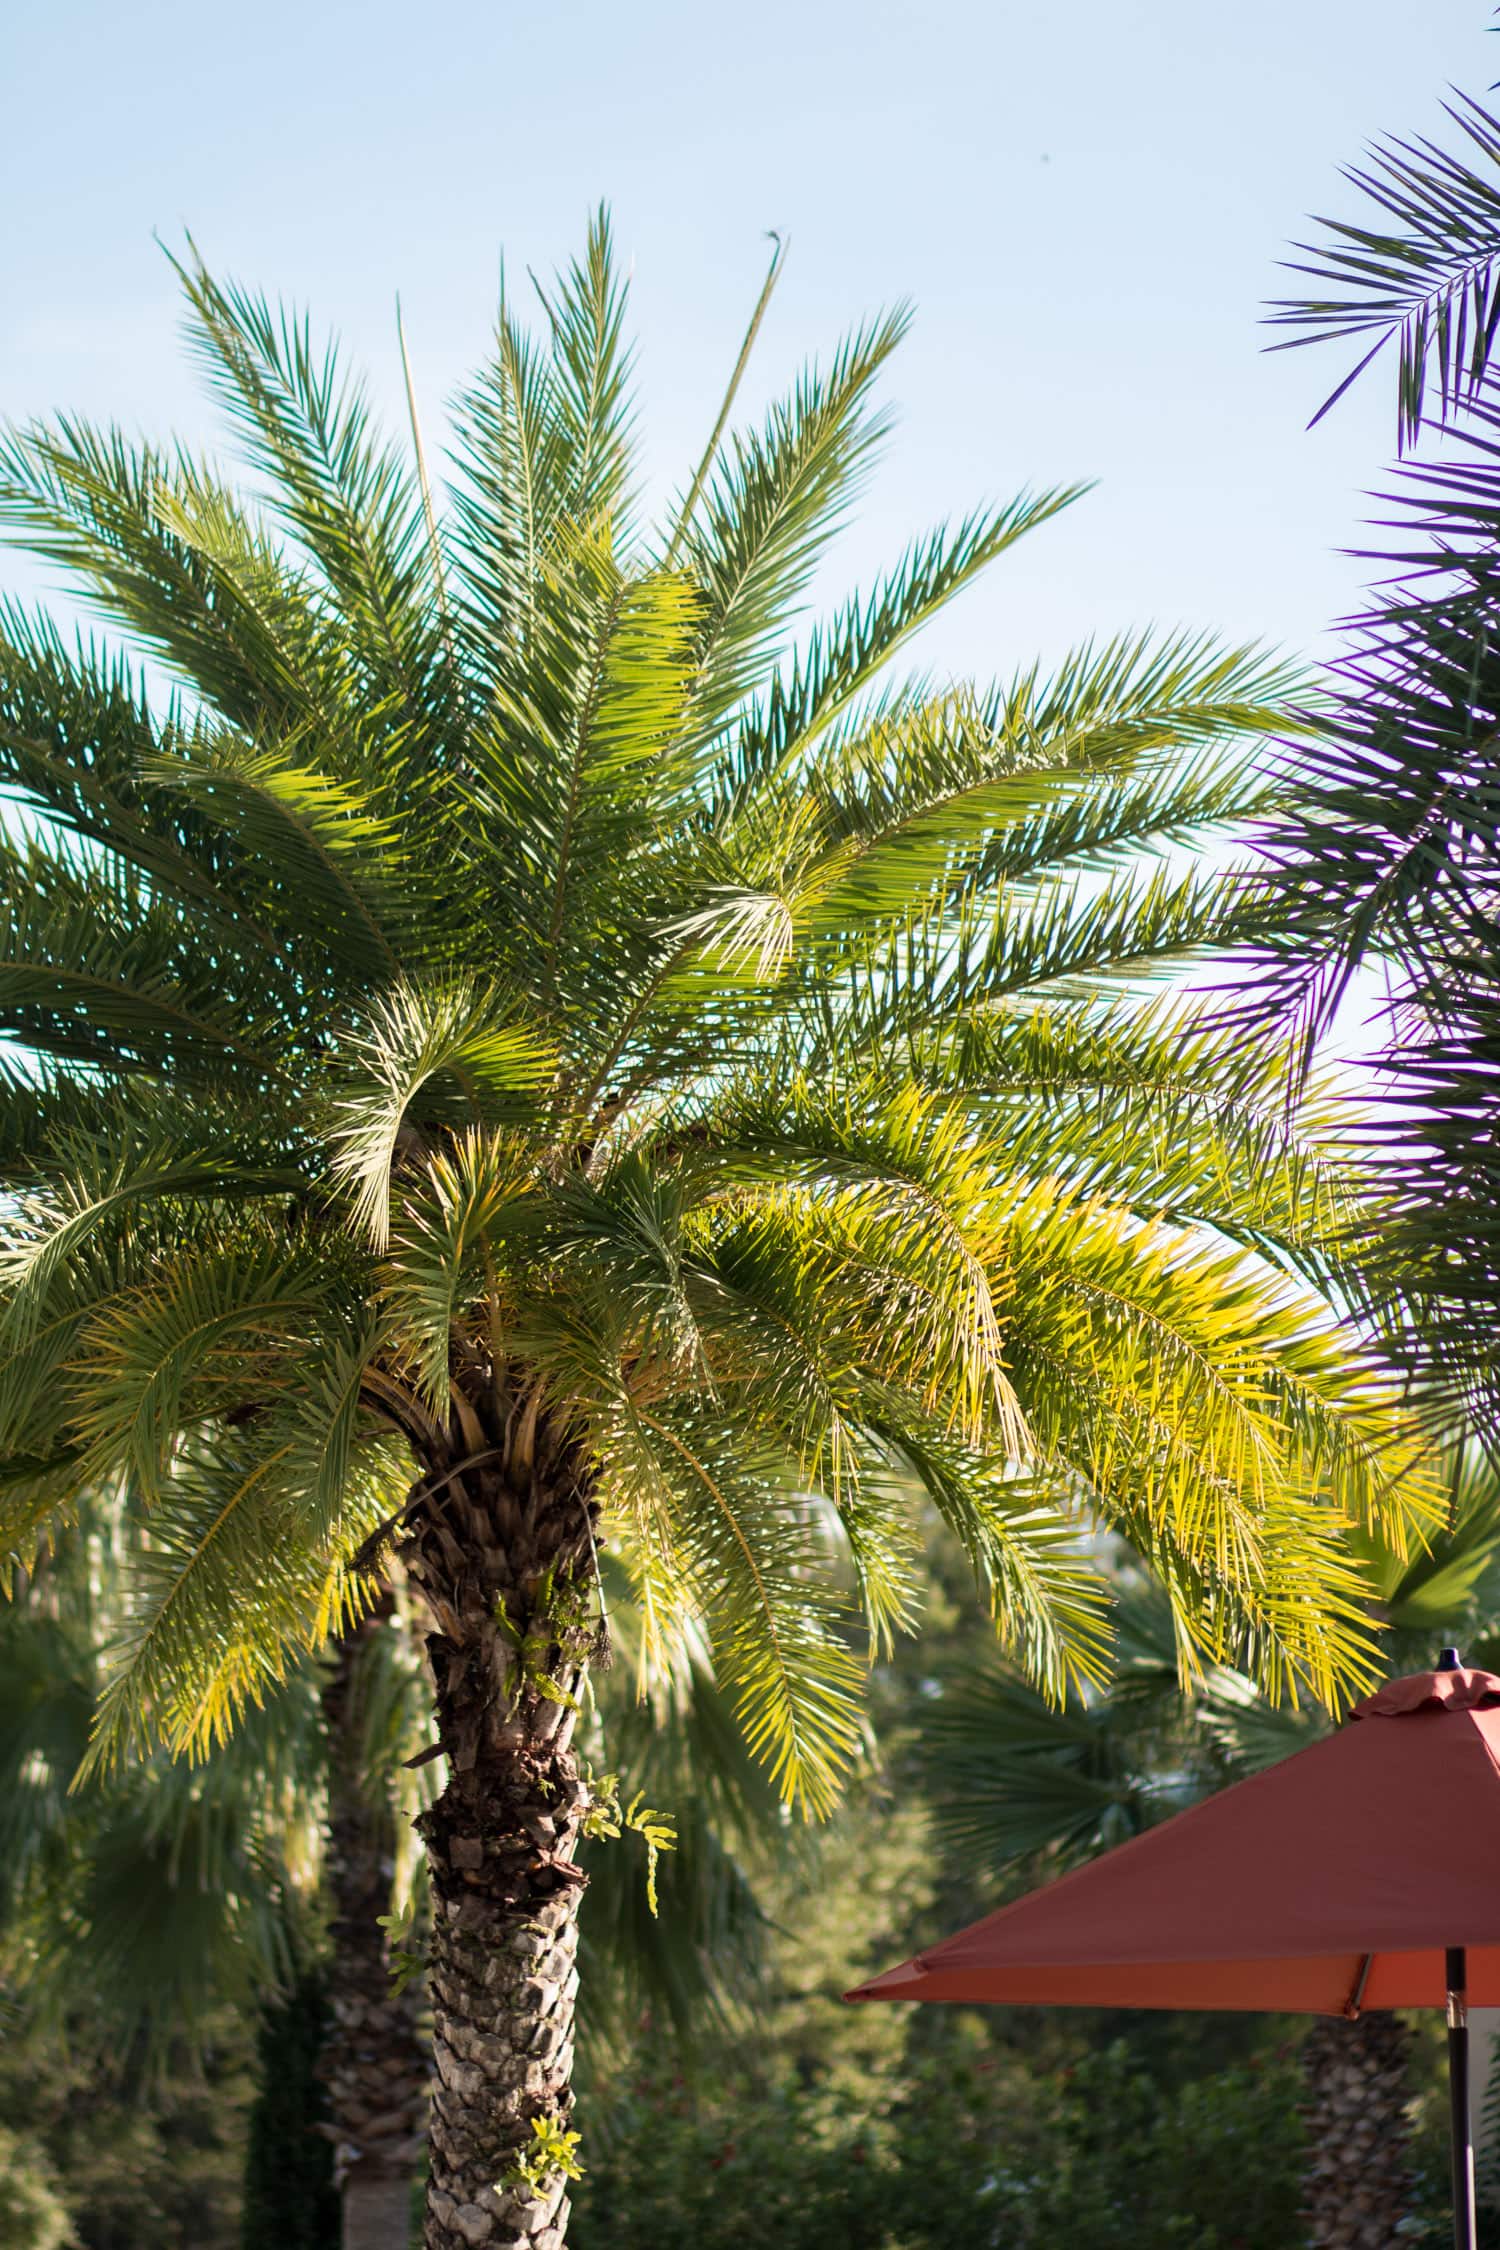 Summer in Florida is pretty spectacular. The bright sunshine, vivid blue skies, and regal palm tress are hard to beat!